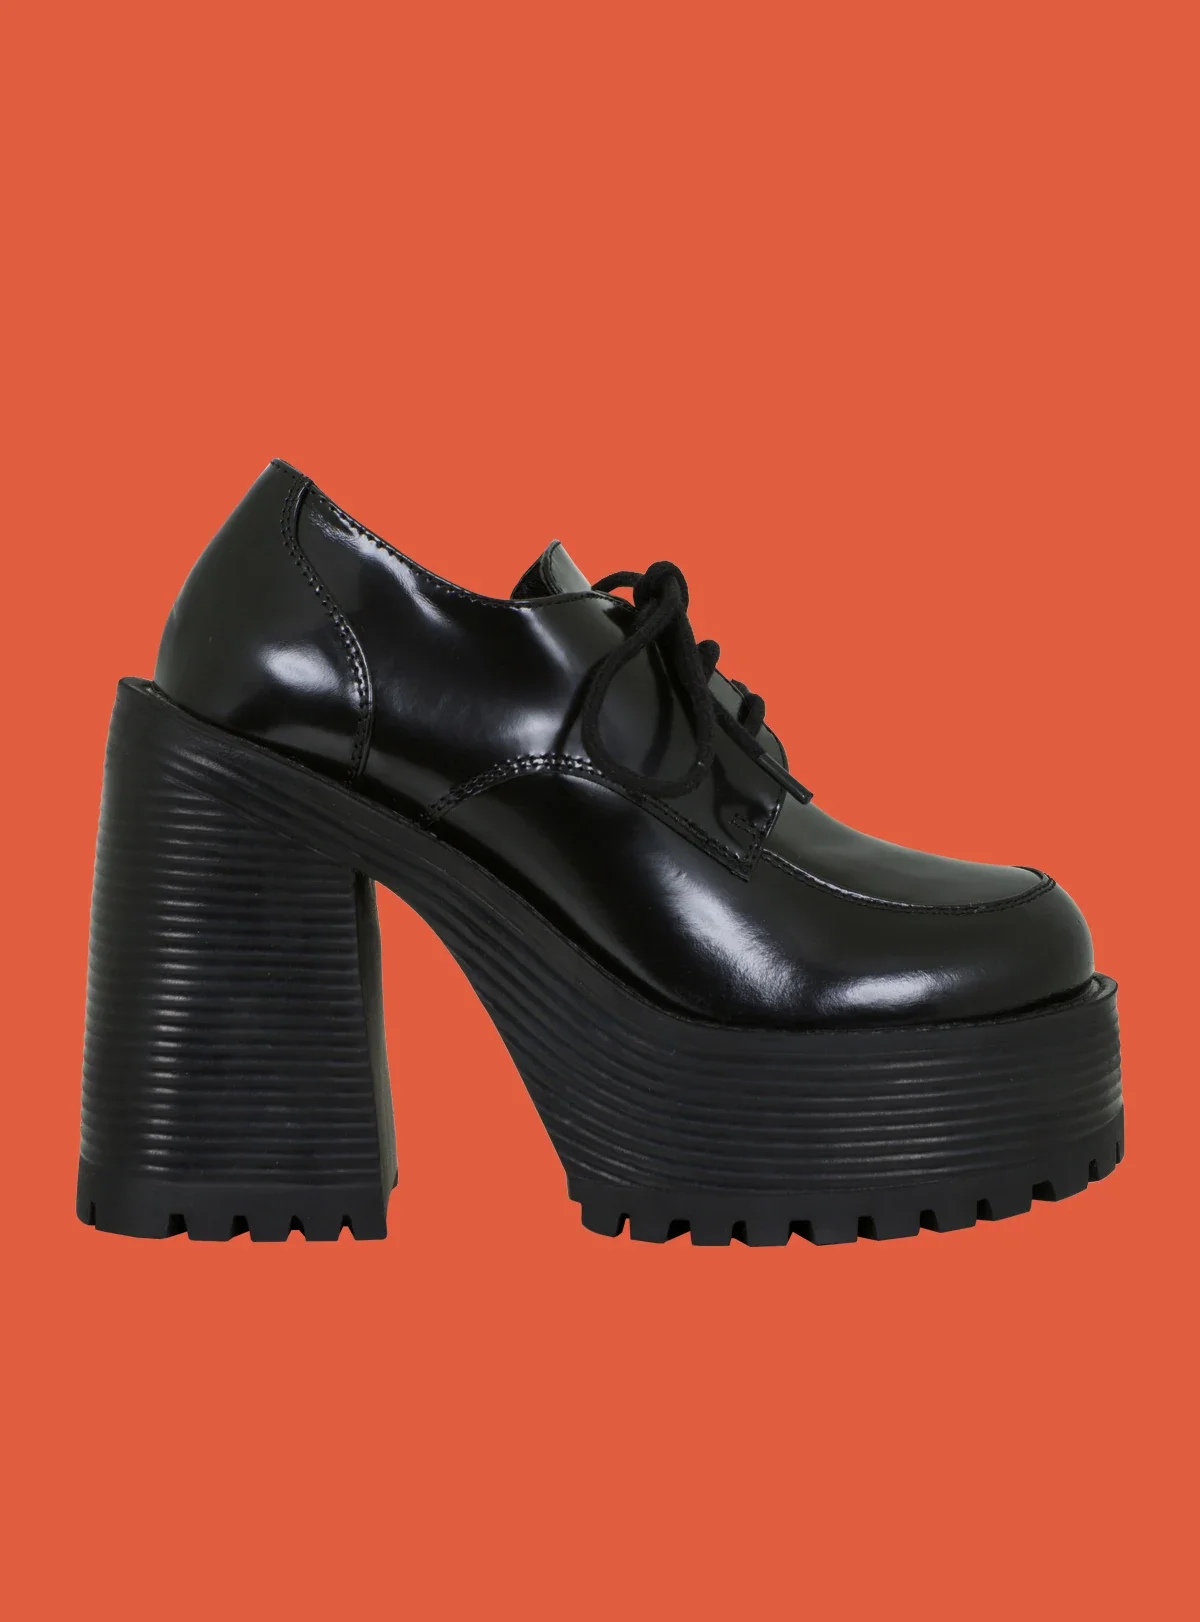 Unif: Introducing... The Hera Clog | Milled